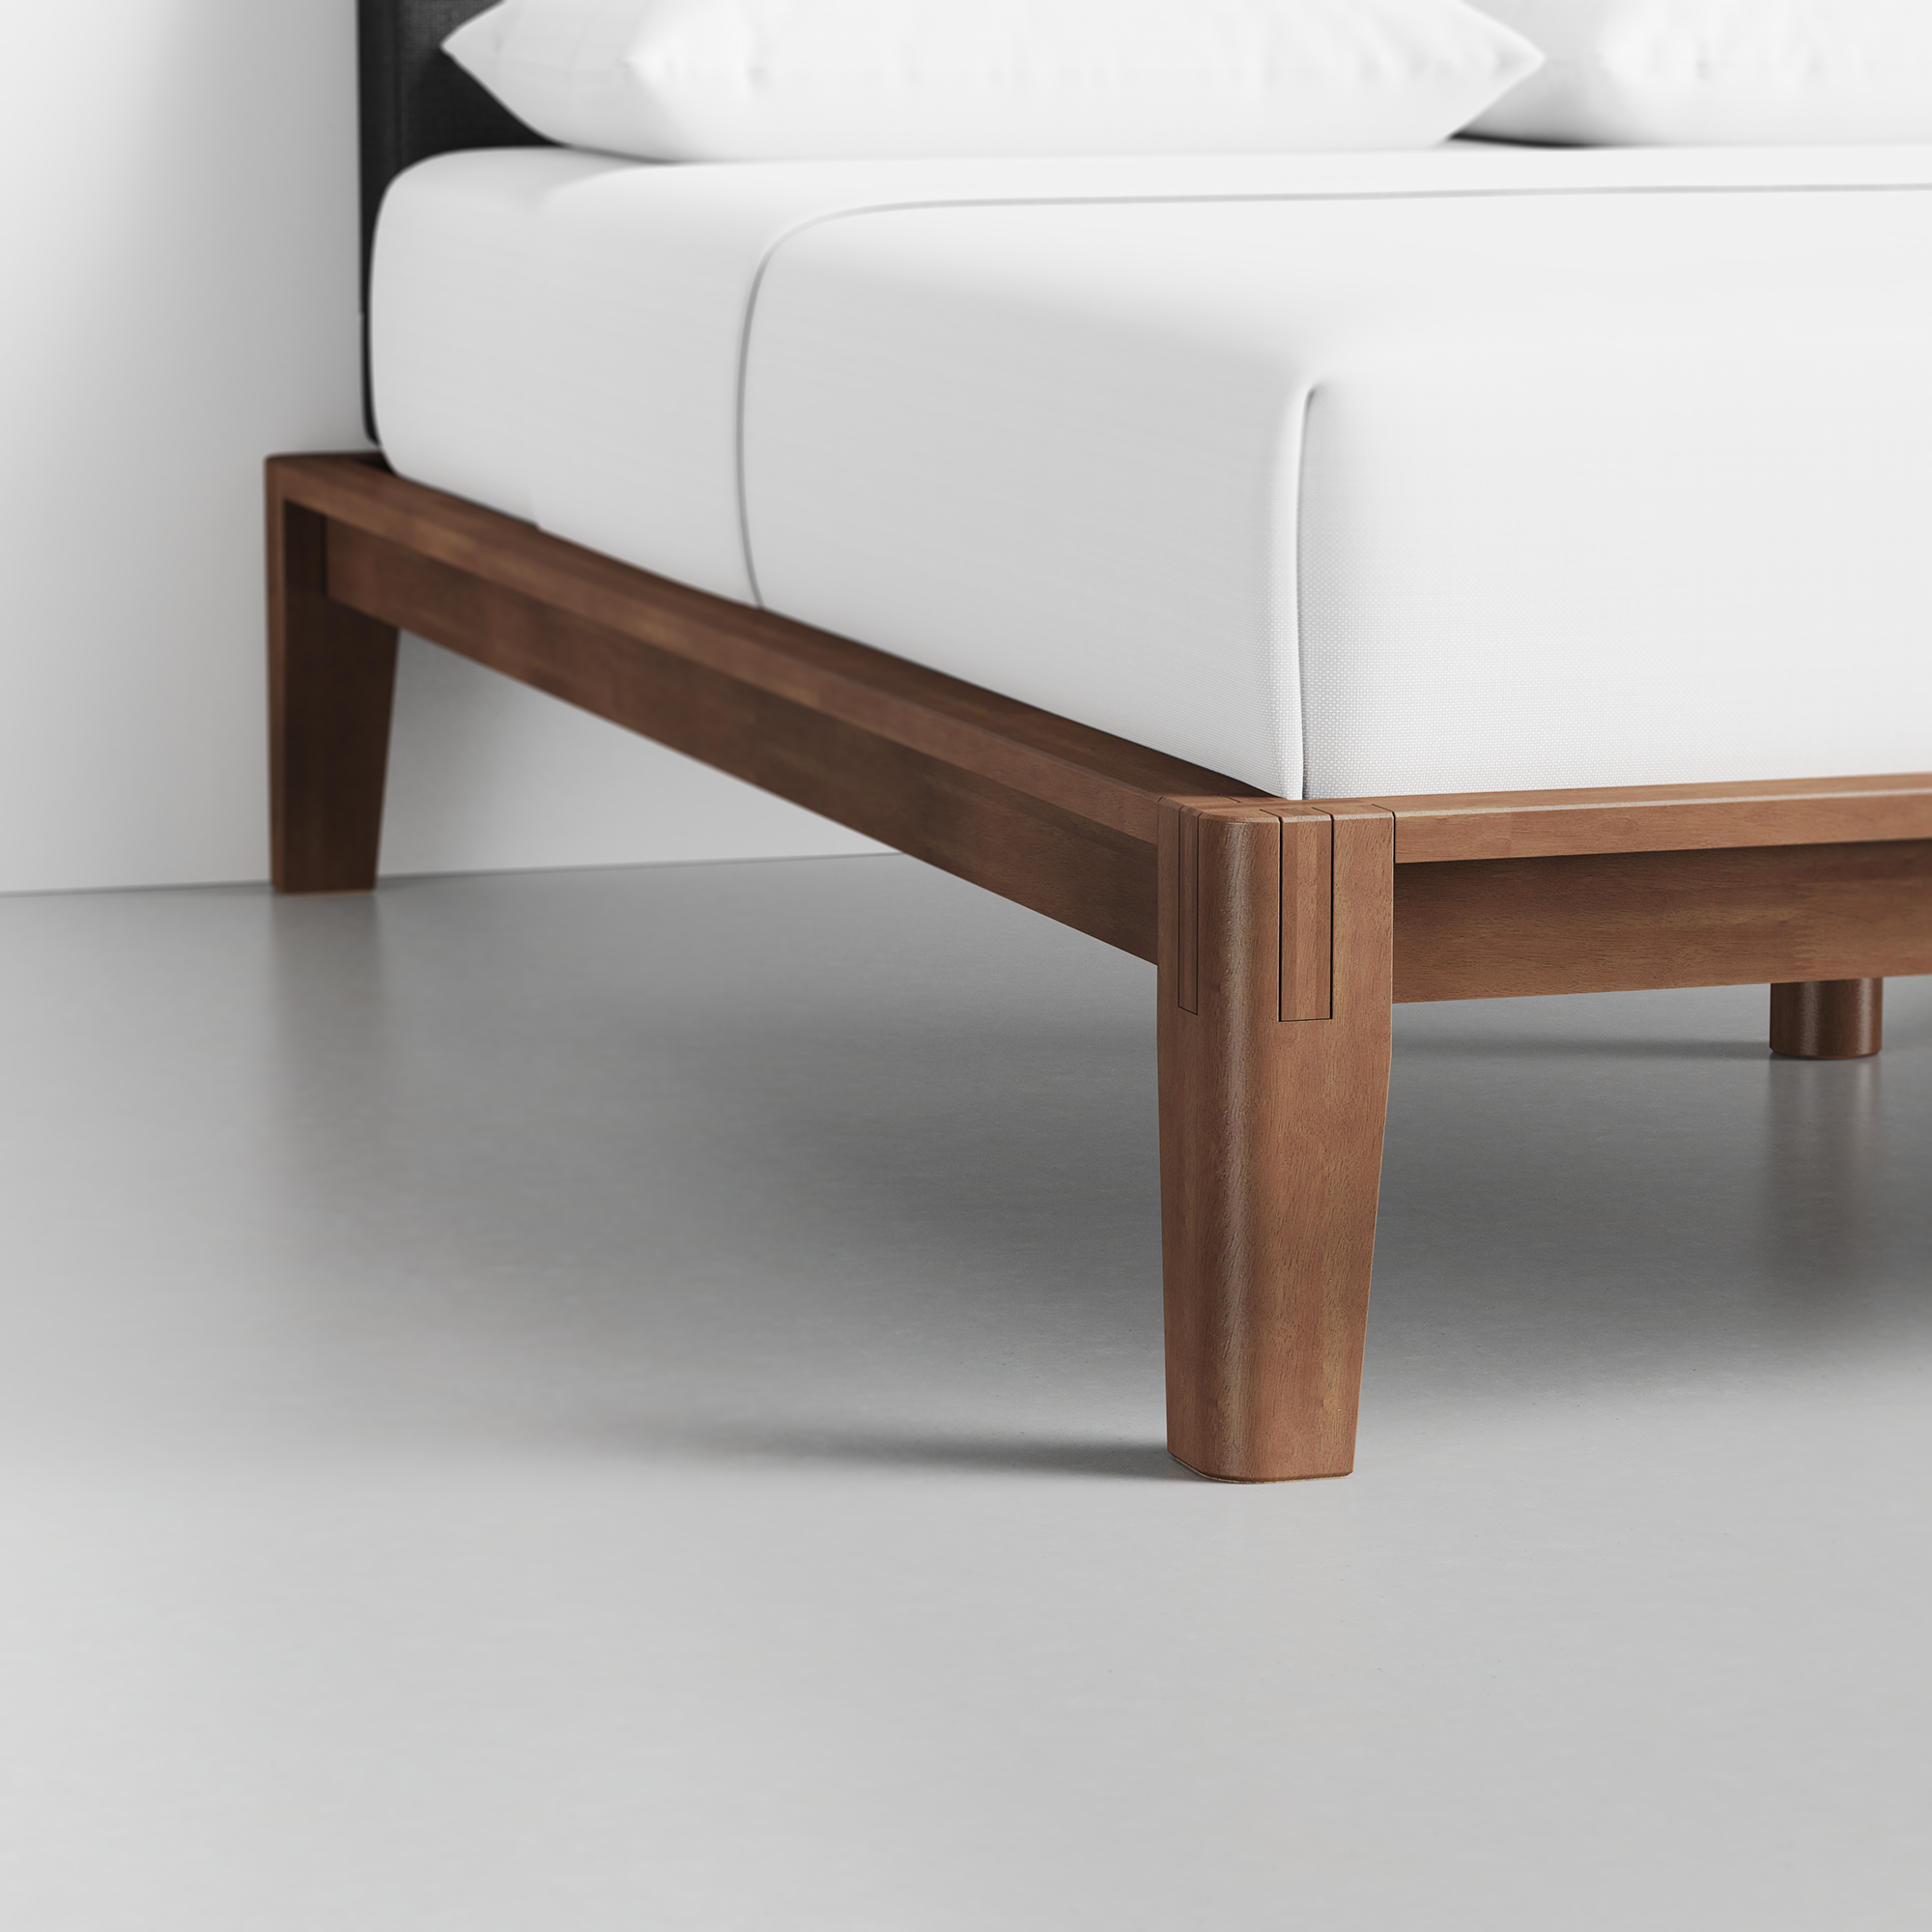 The perfect platform bed frame - The Bed